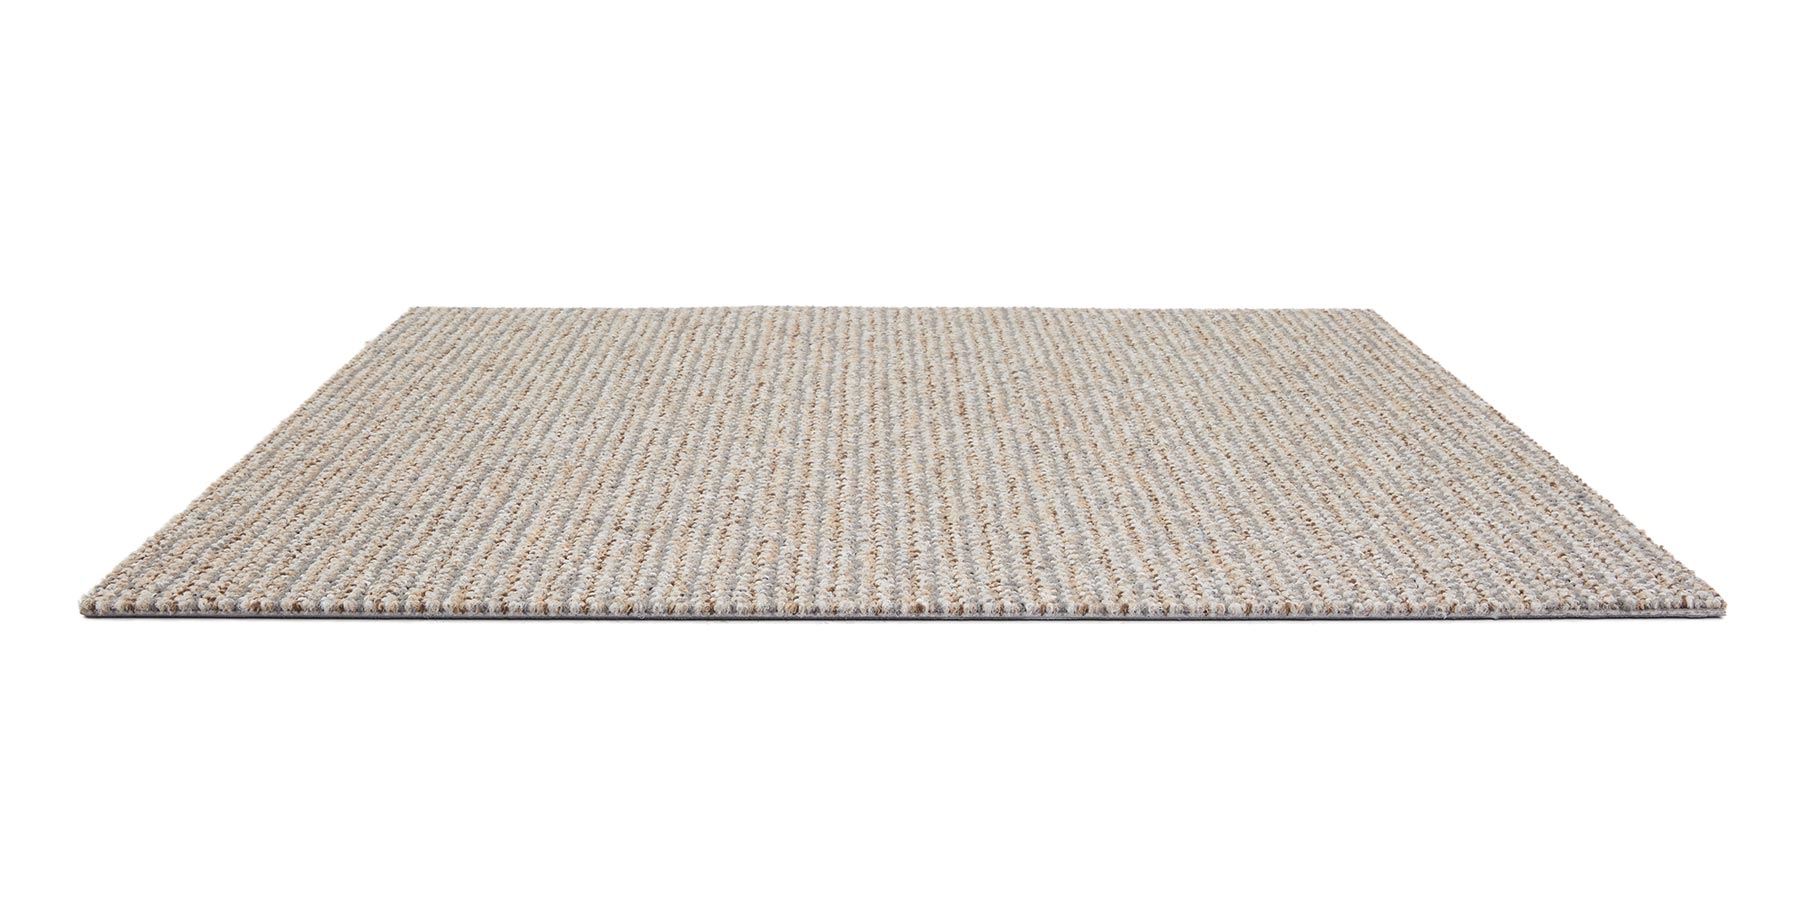 Chatterbox Chit Chat Carpet